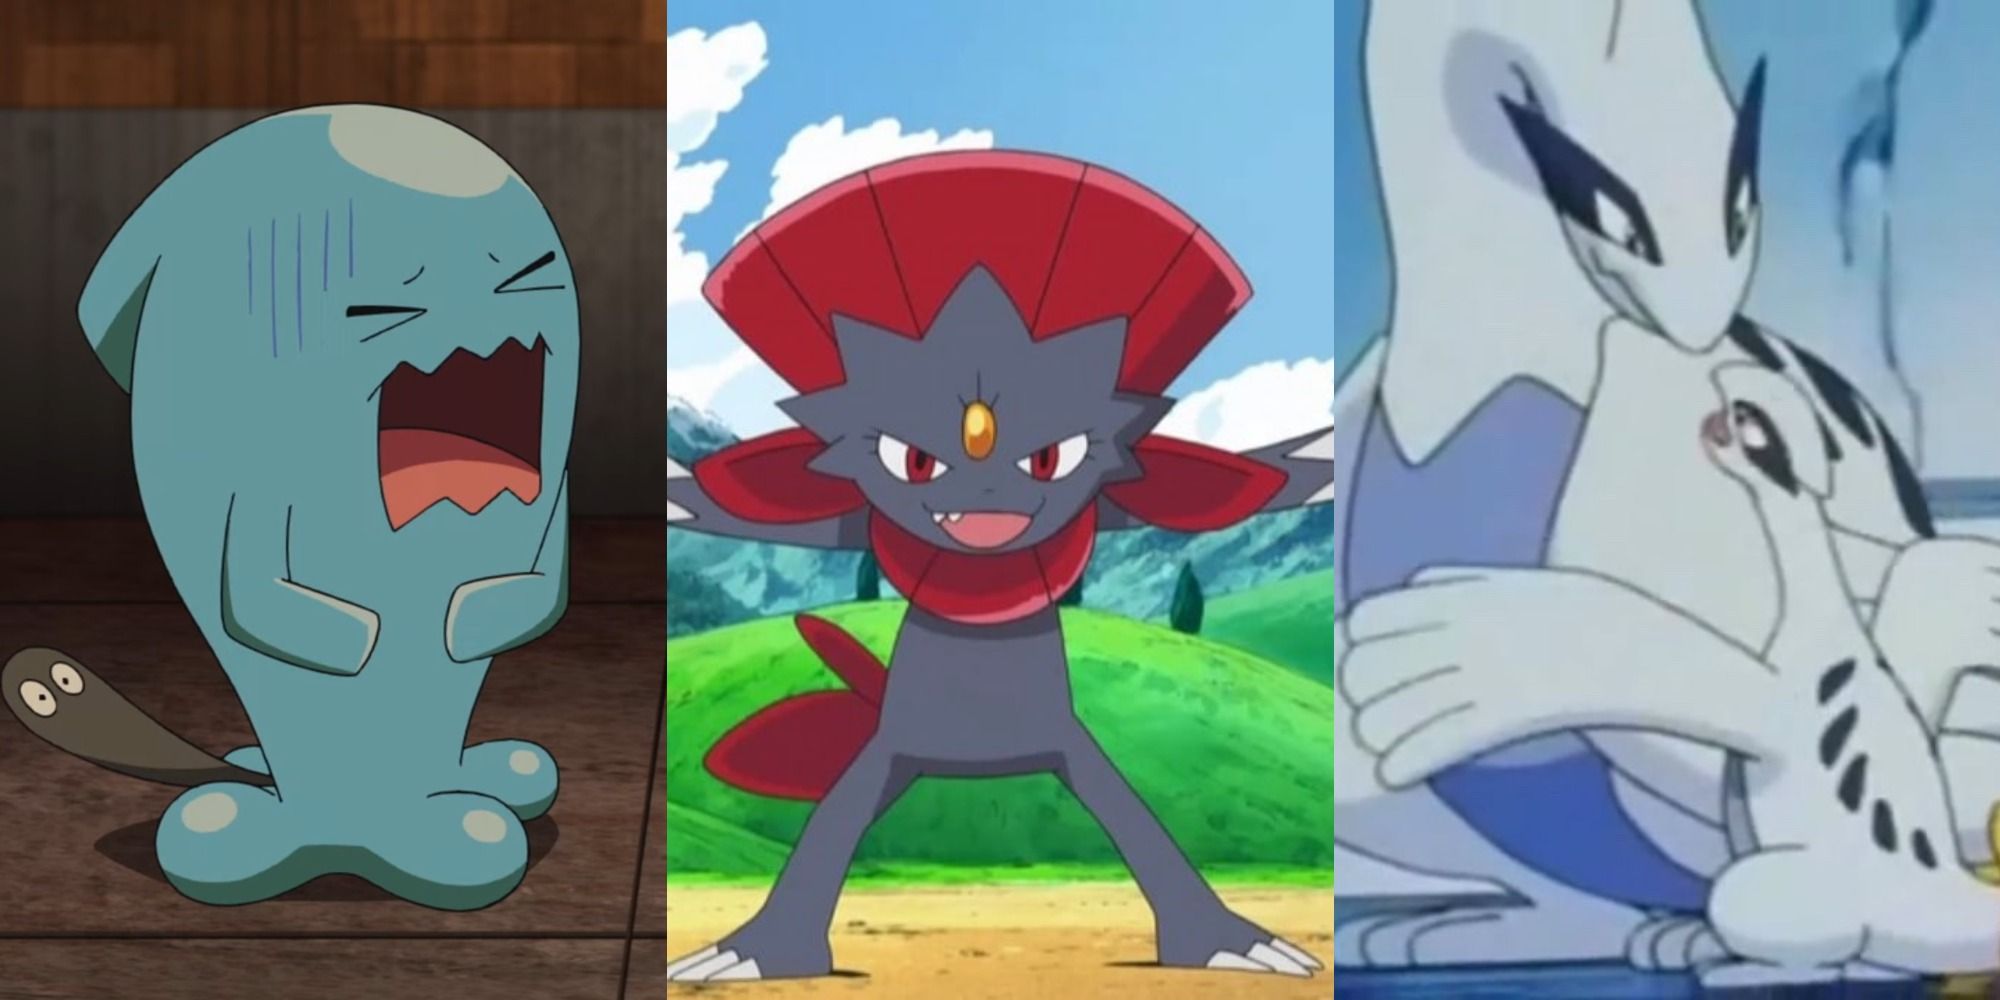 From left to right: Wobbuffet looking distraught, Weavile jumping into action, Lugia with its baby